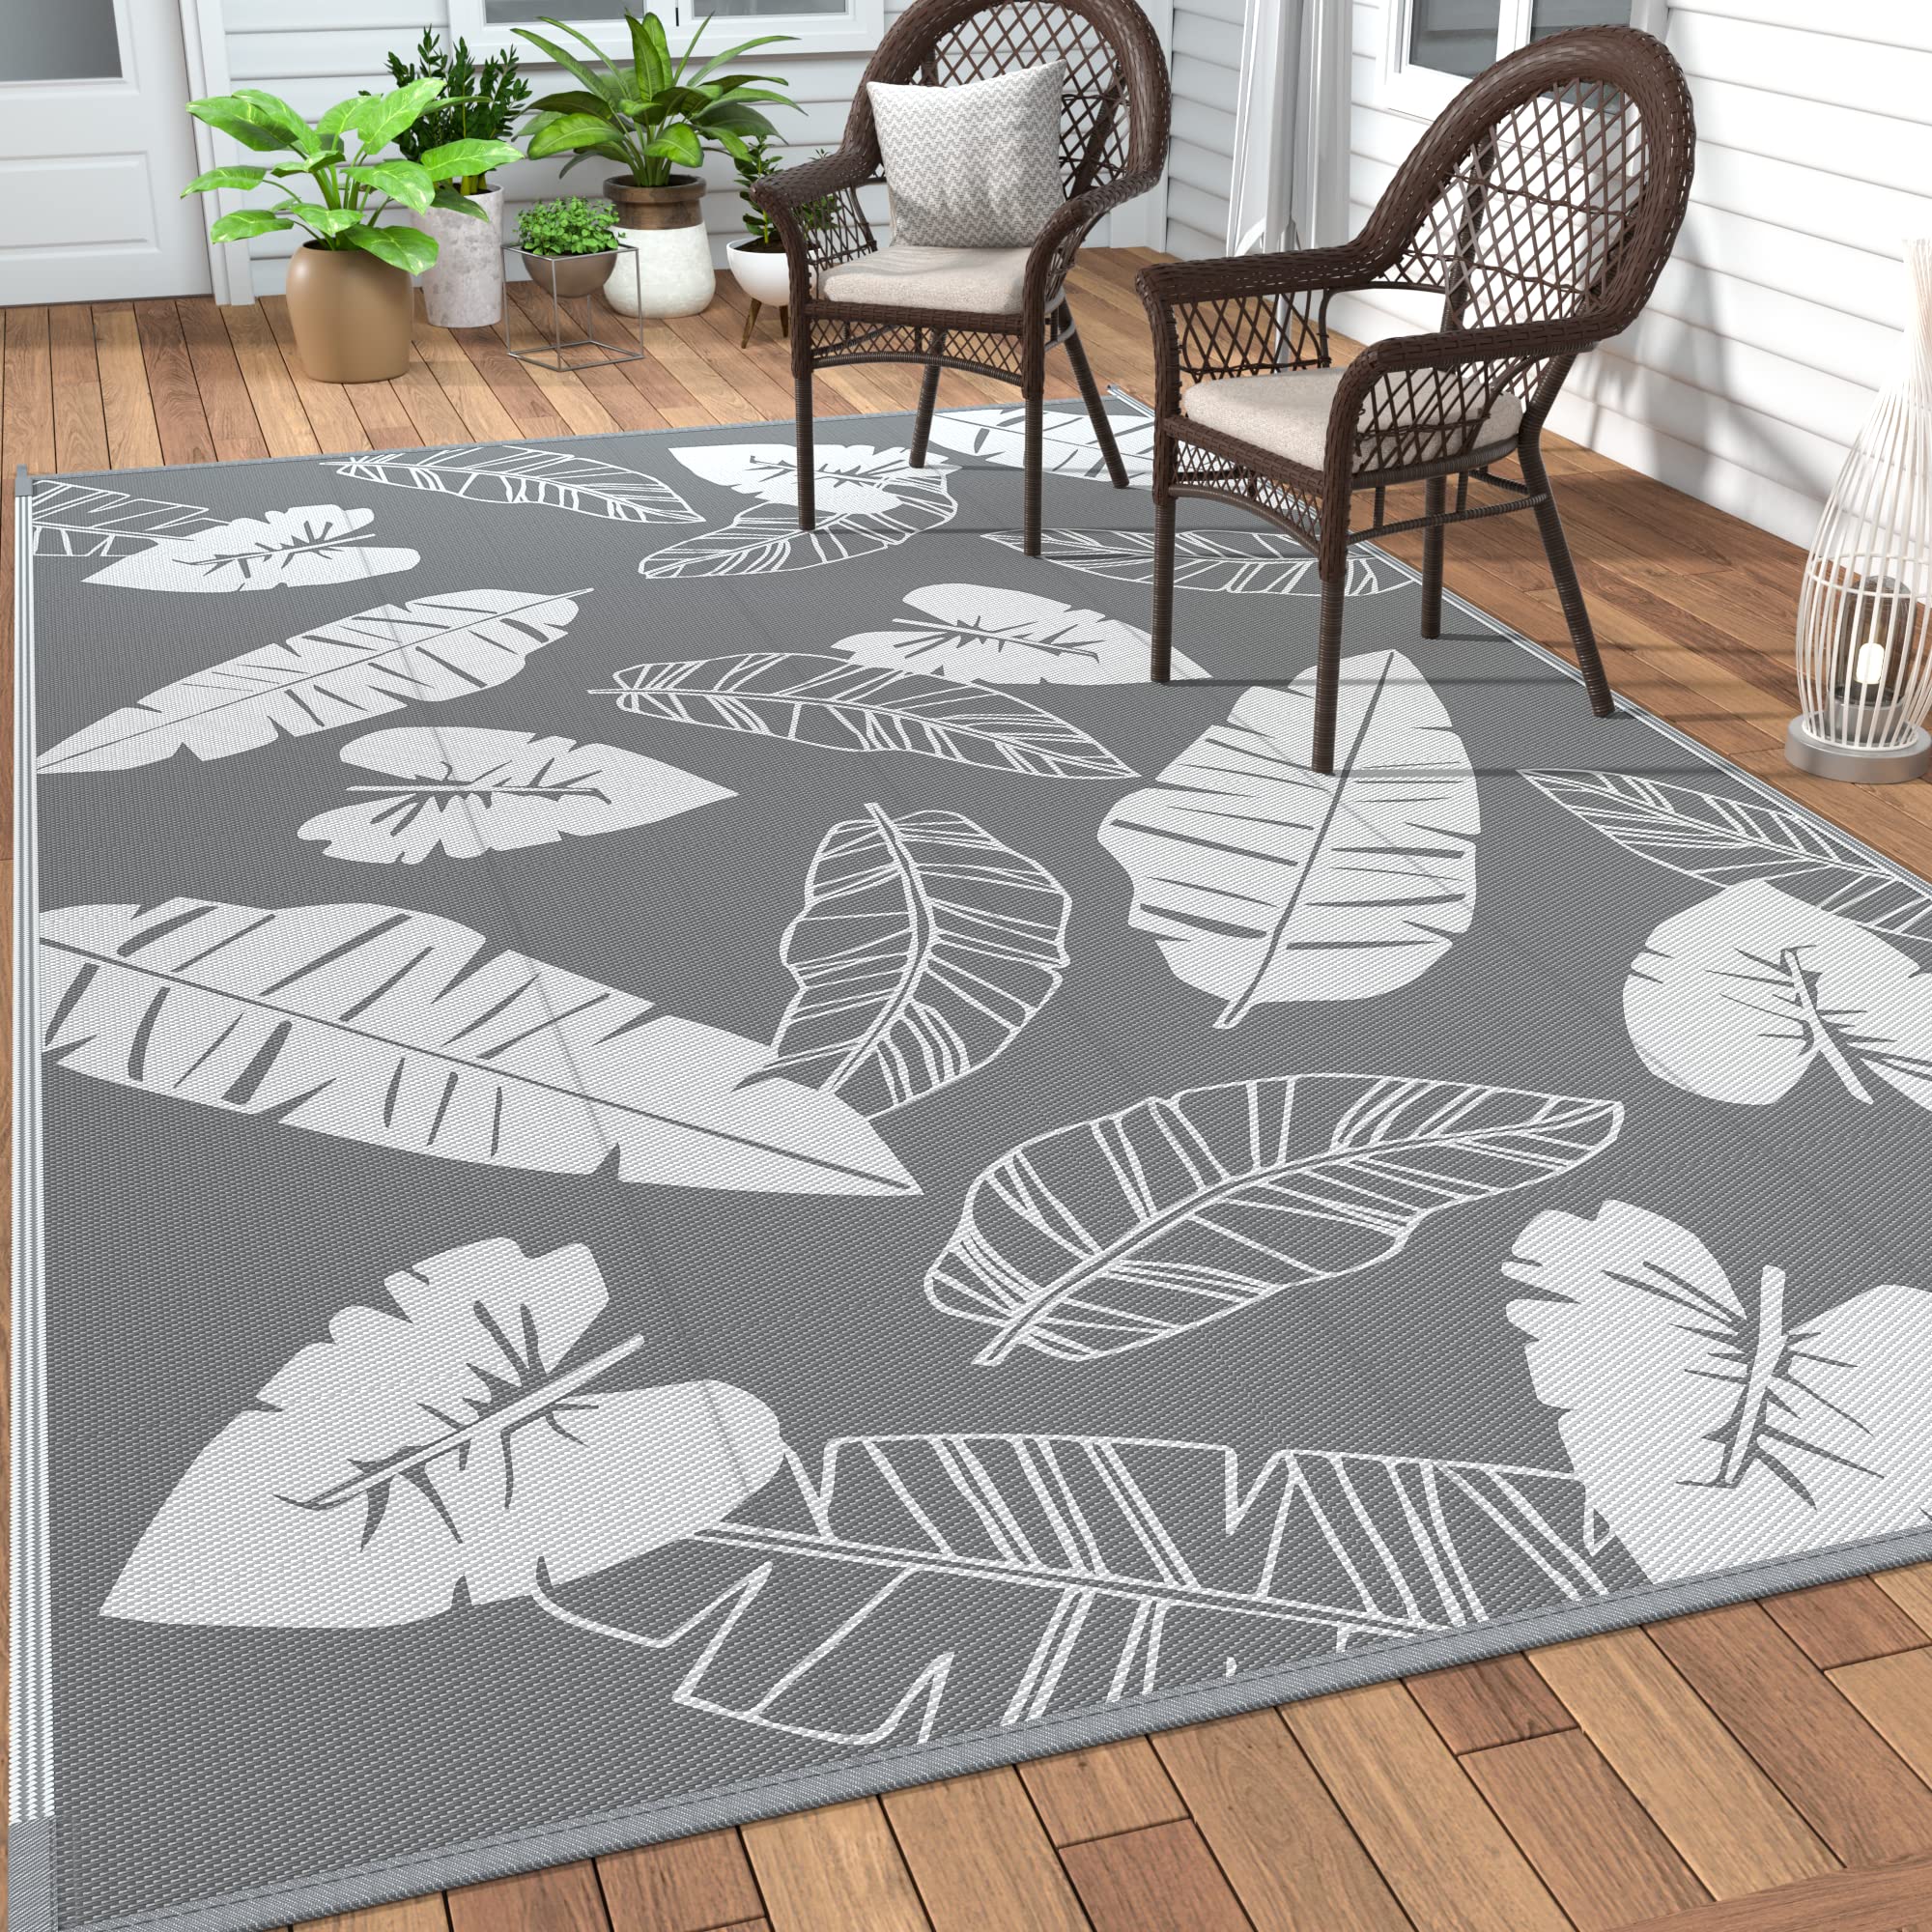 DEORAB Outdoor Rug for Big on Sale Clearance, 5'x8' Reversible Plastic Rugs, White & Grey - image 1 of 8